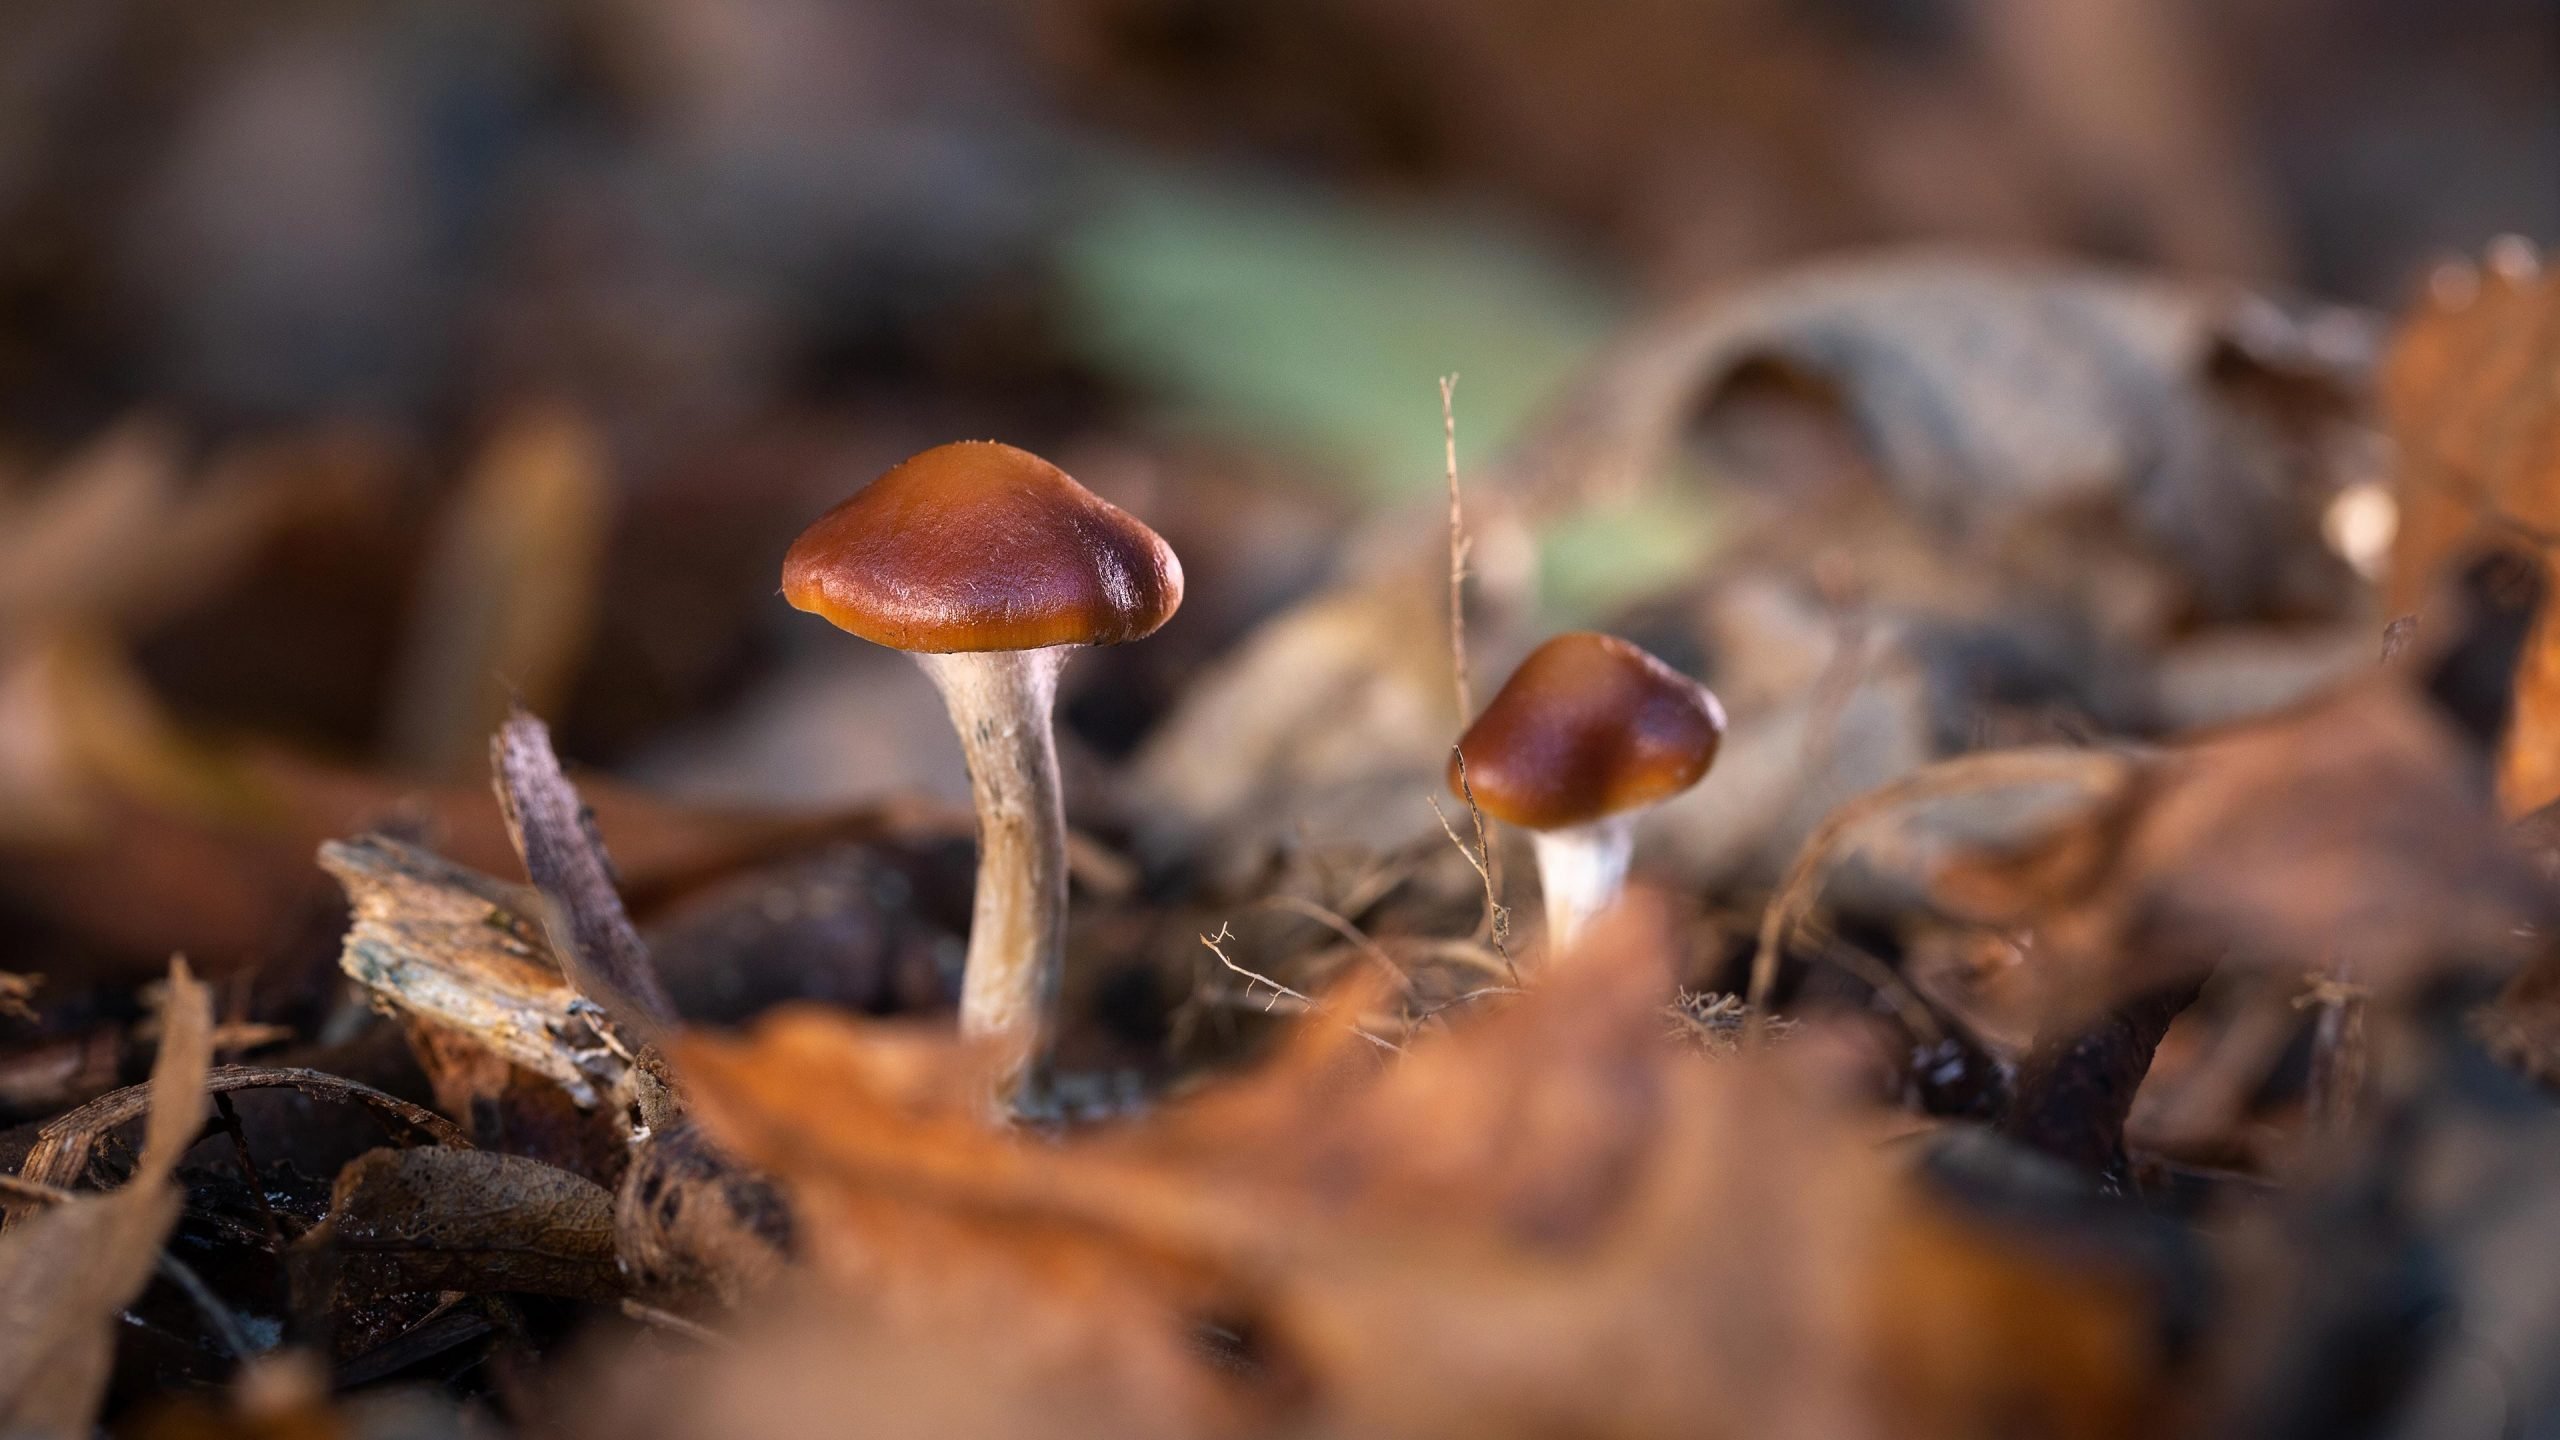 Psychedelic Magic Mushroom Compound, Psilocybin, acts at least as well as leading antidepressant